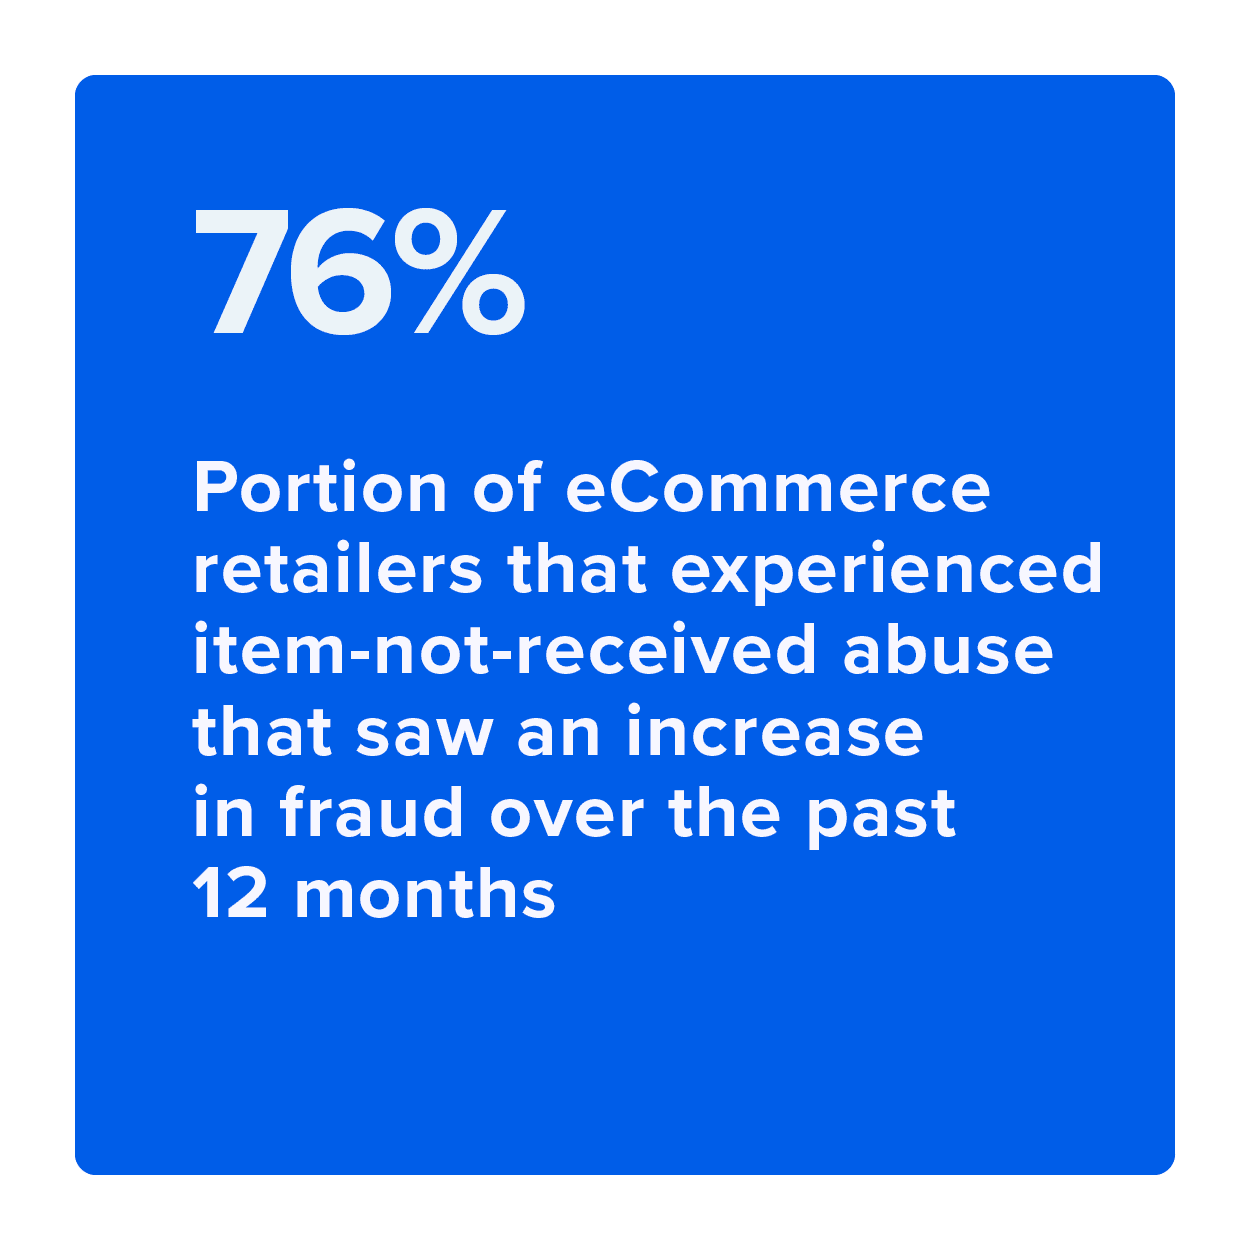 Portion of eCommerce retailers that experienced item-not-received abuse that saw an increase in fraud on the past year